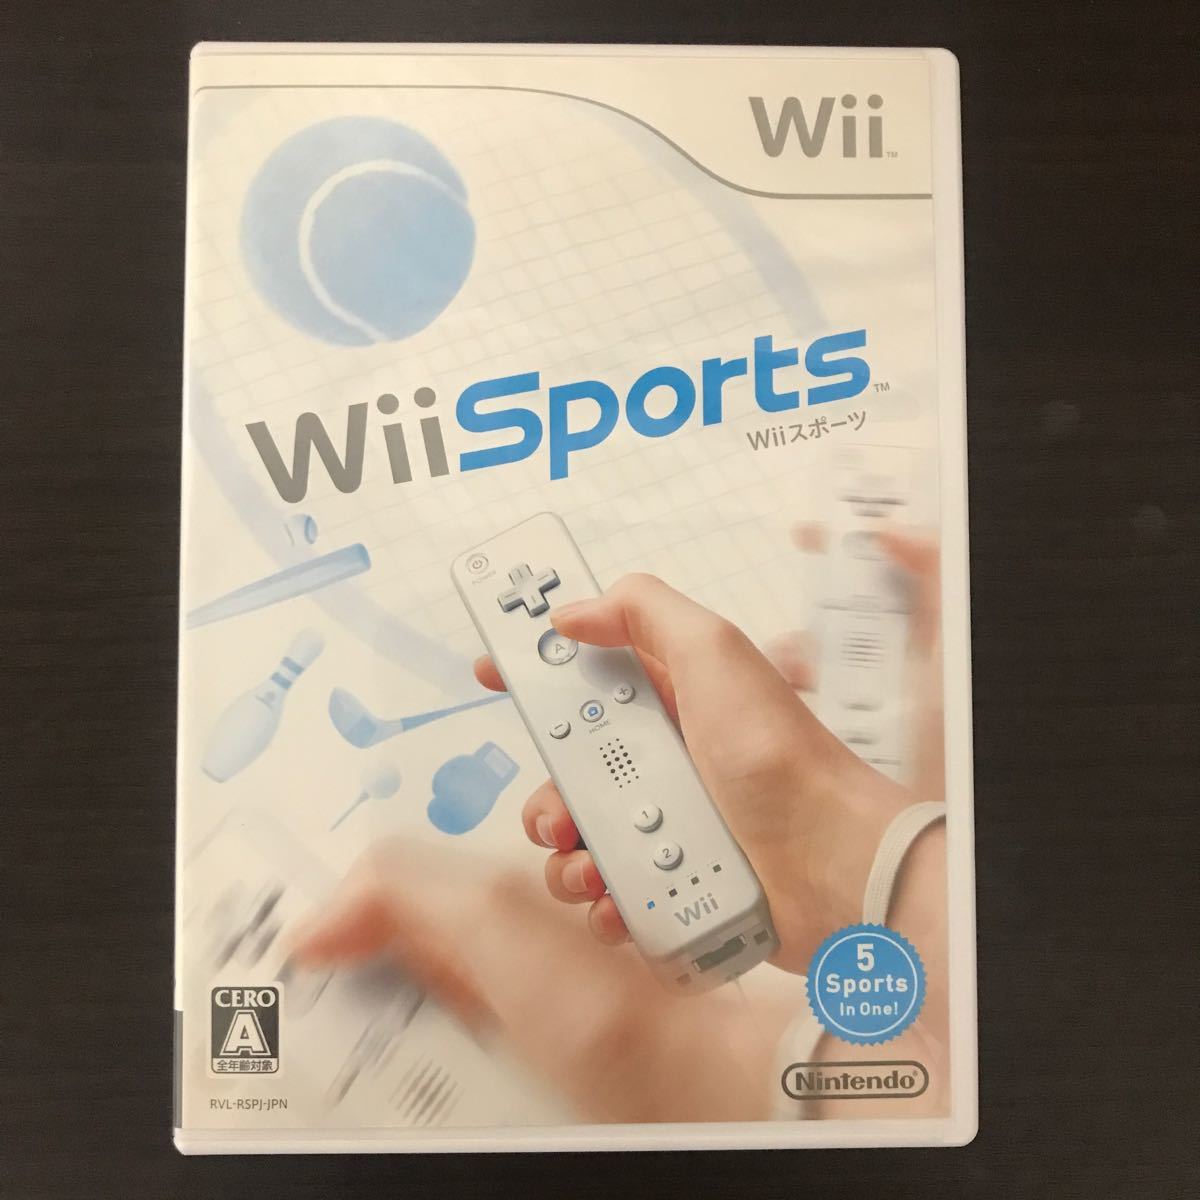 Wiiソフト　 Wiiスポーツ＆デカスポルタ　2本セット